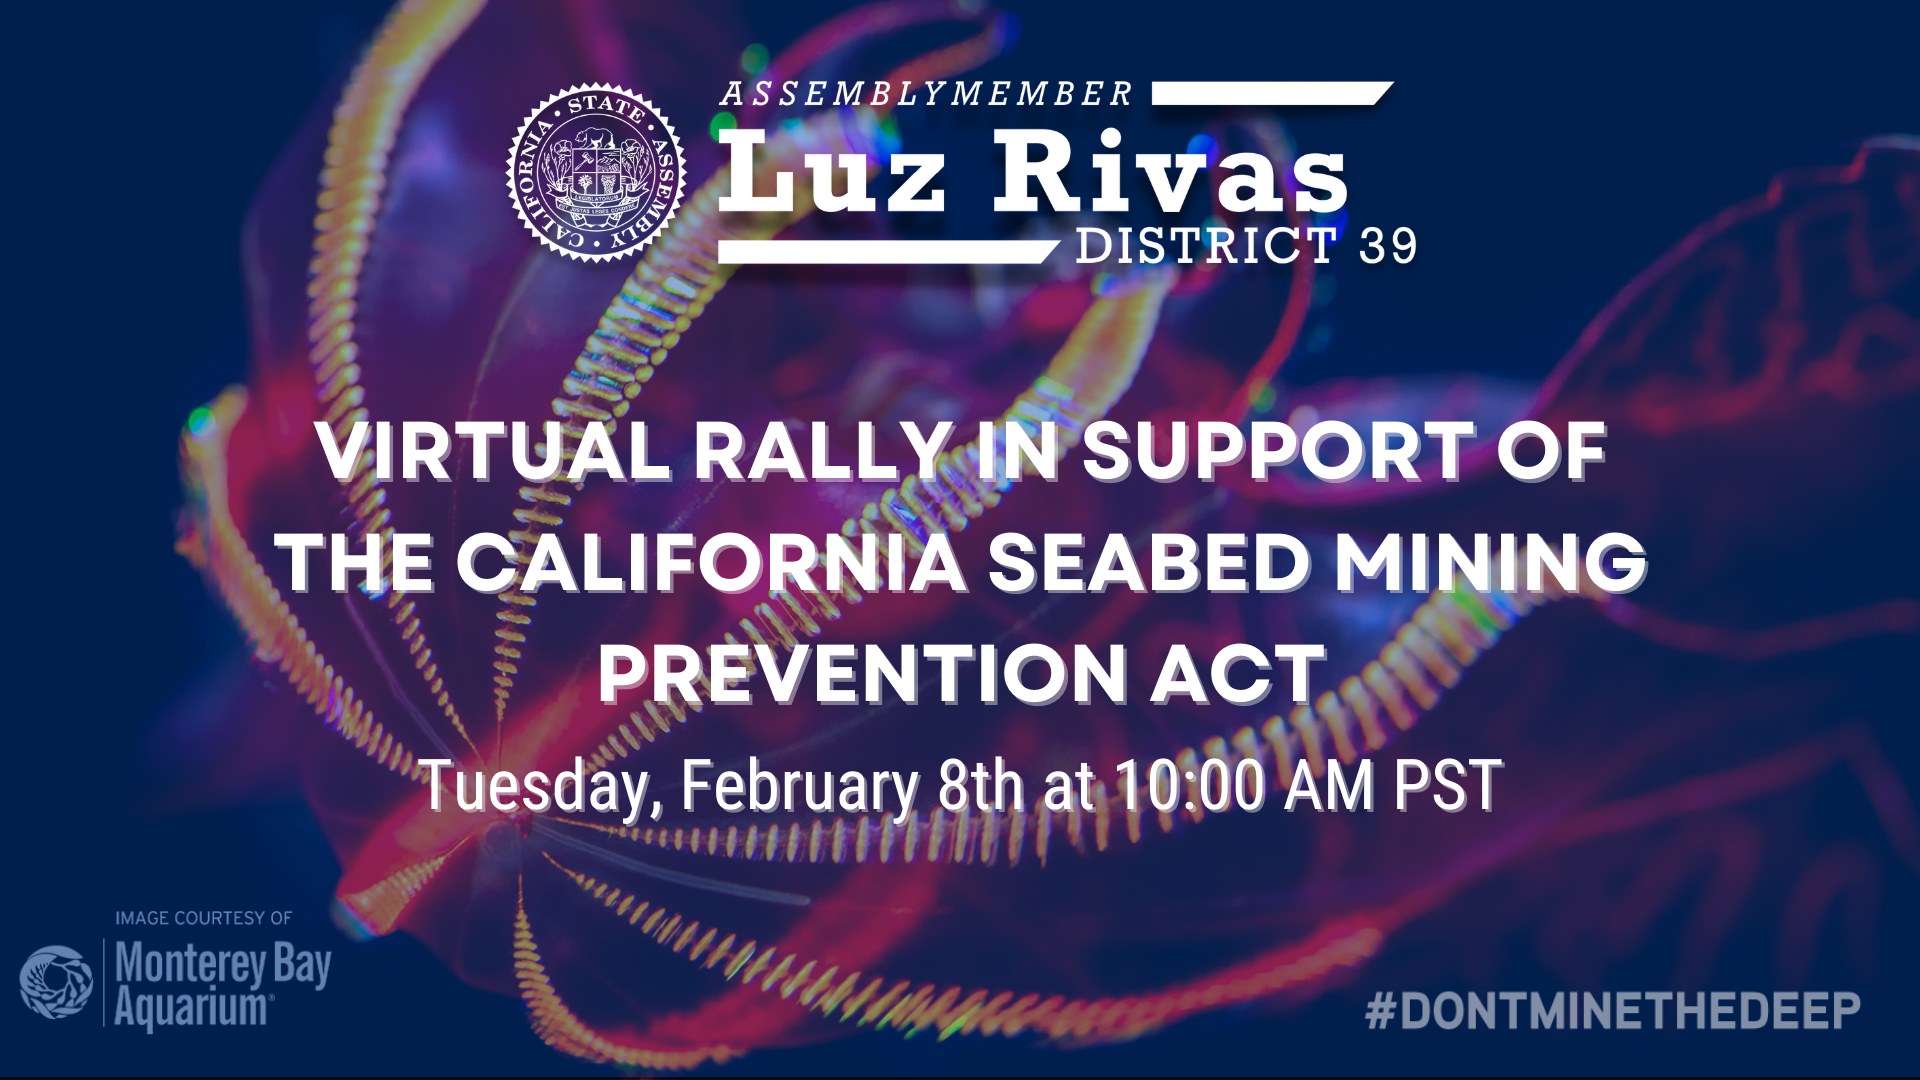 Virtual Rally in Support of the California Seabed Mining Prevention Act